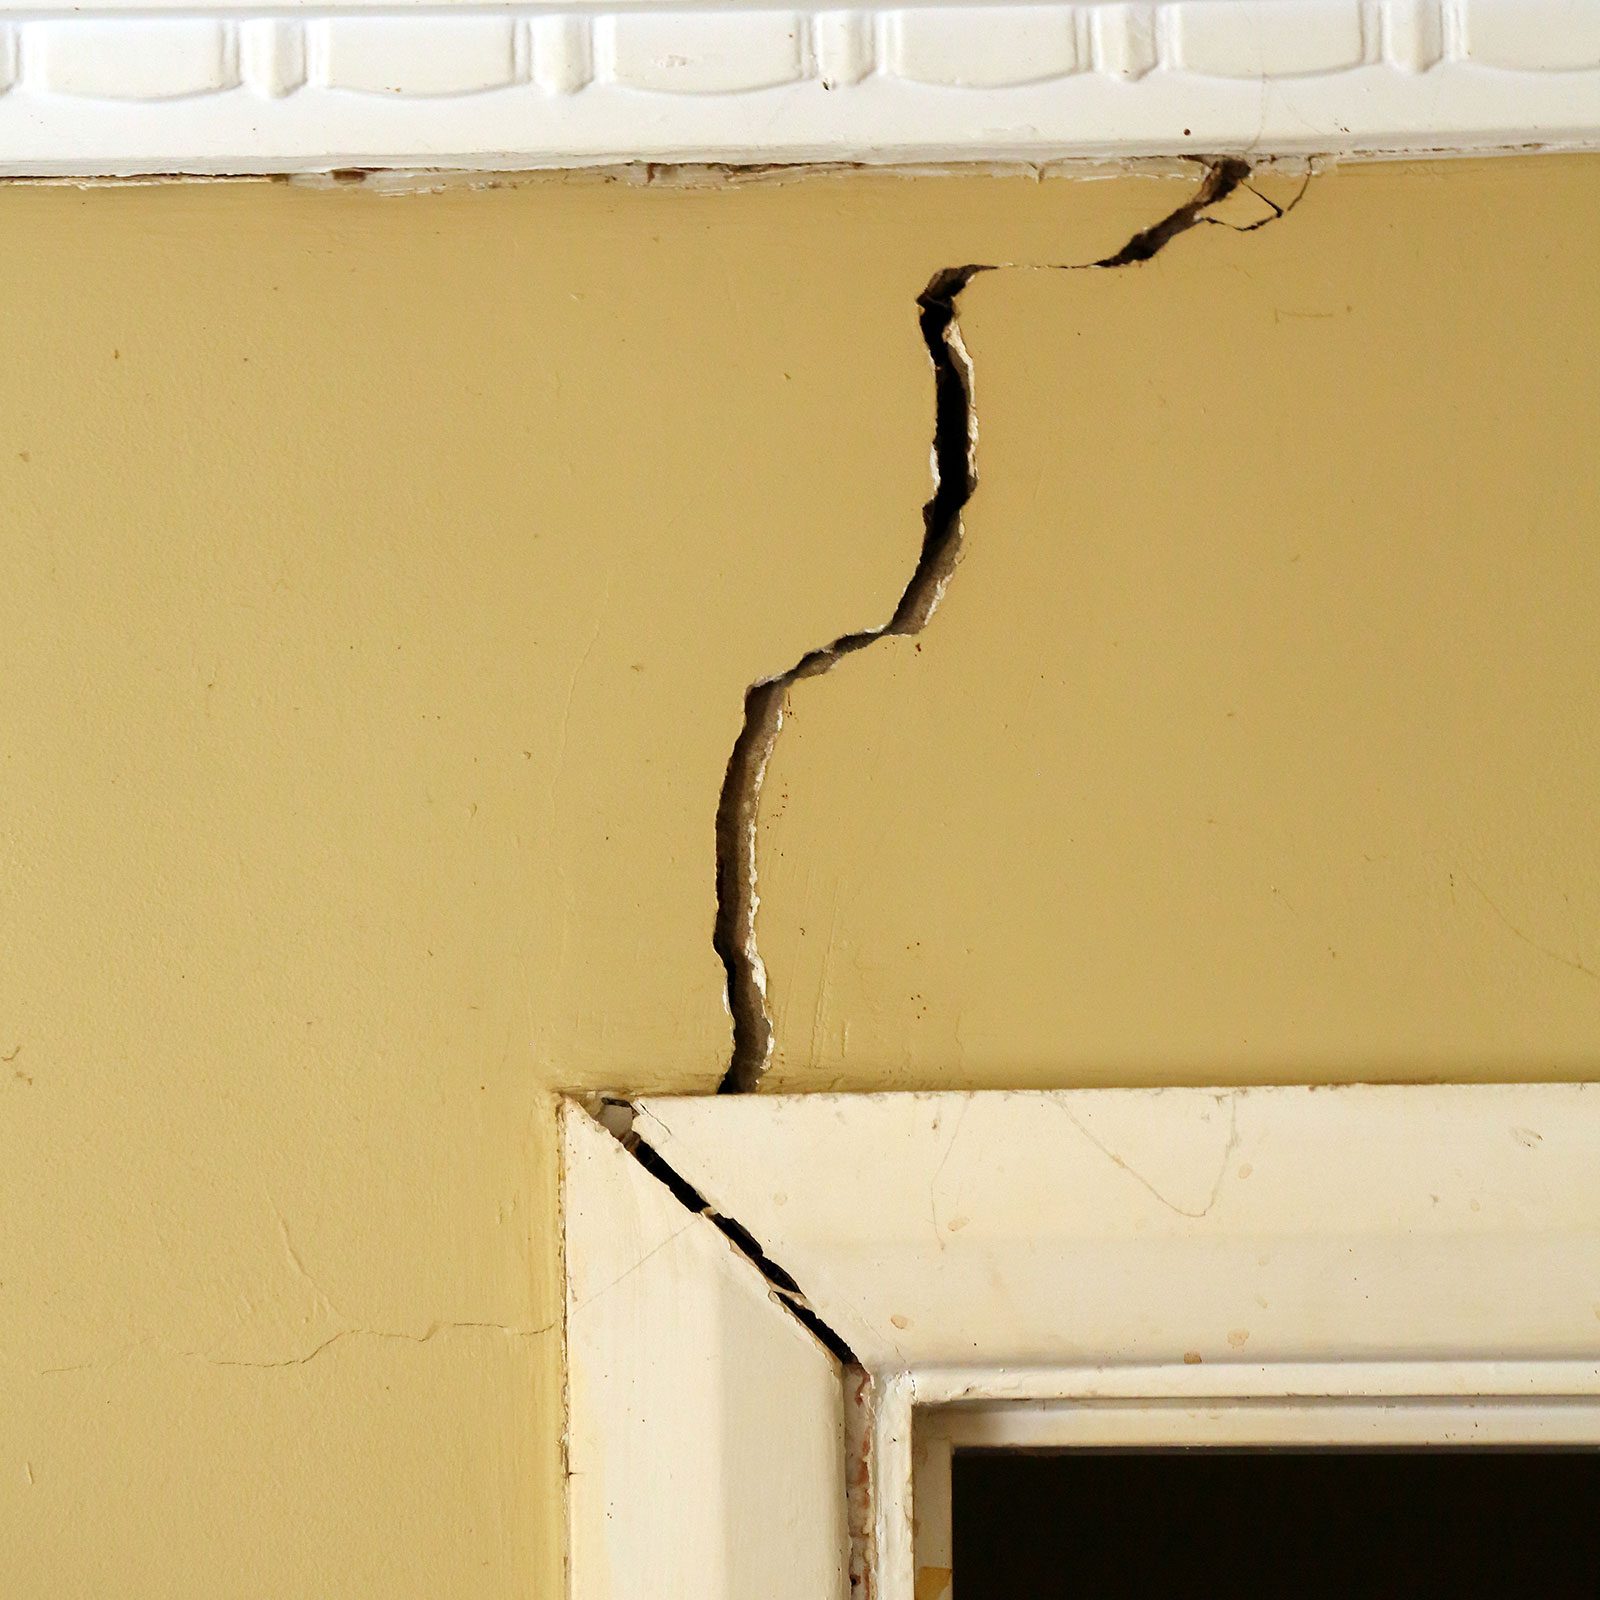 Crack appears in an interior wall